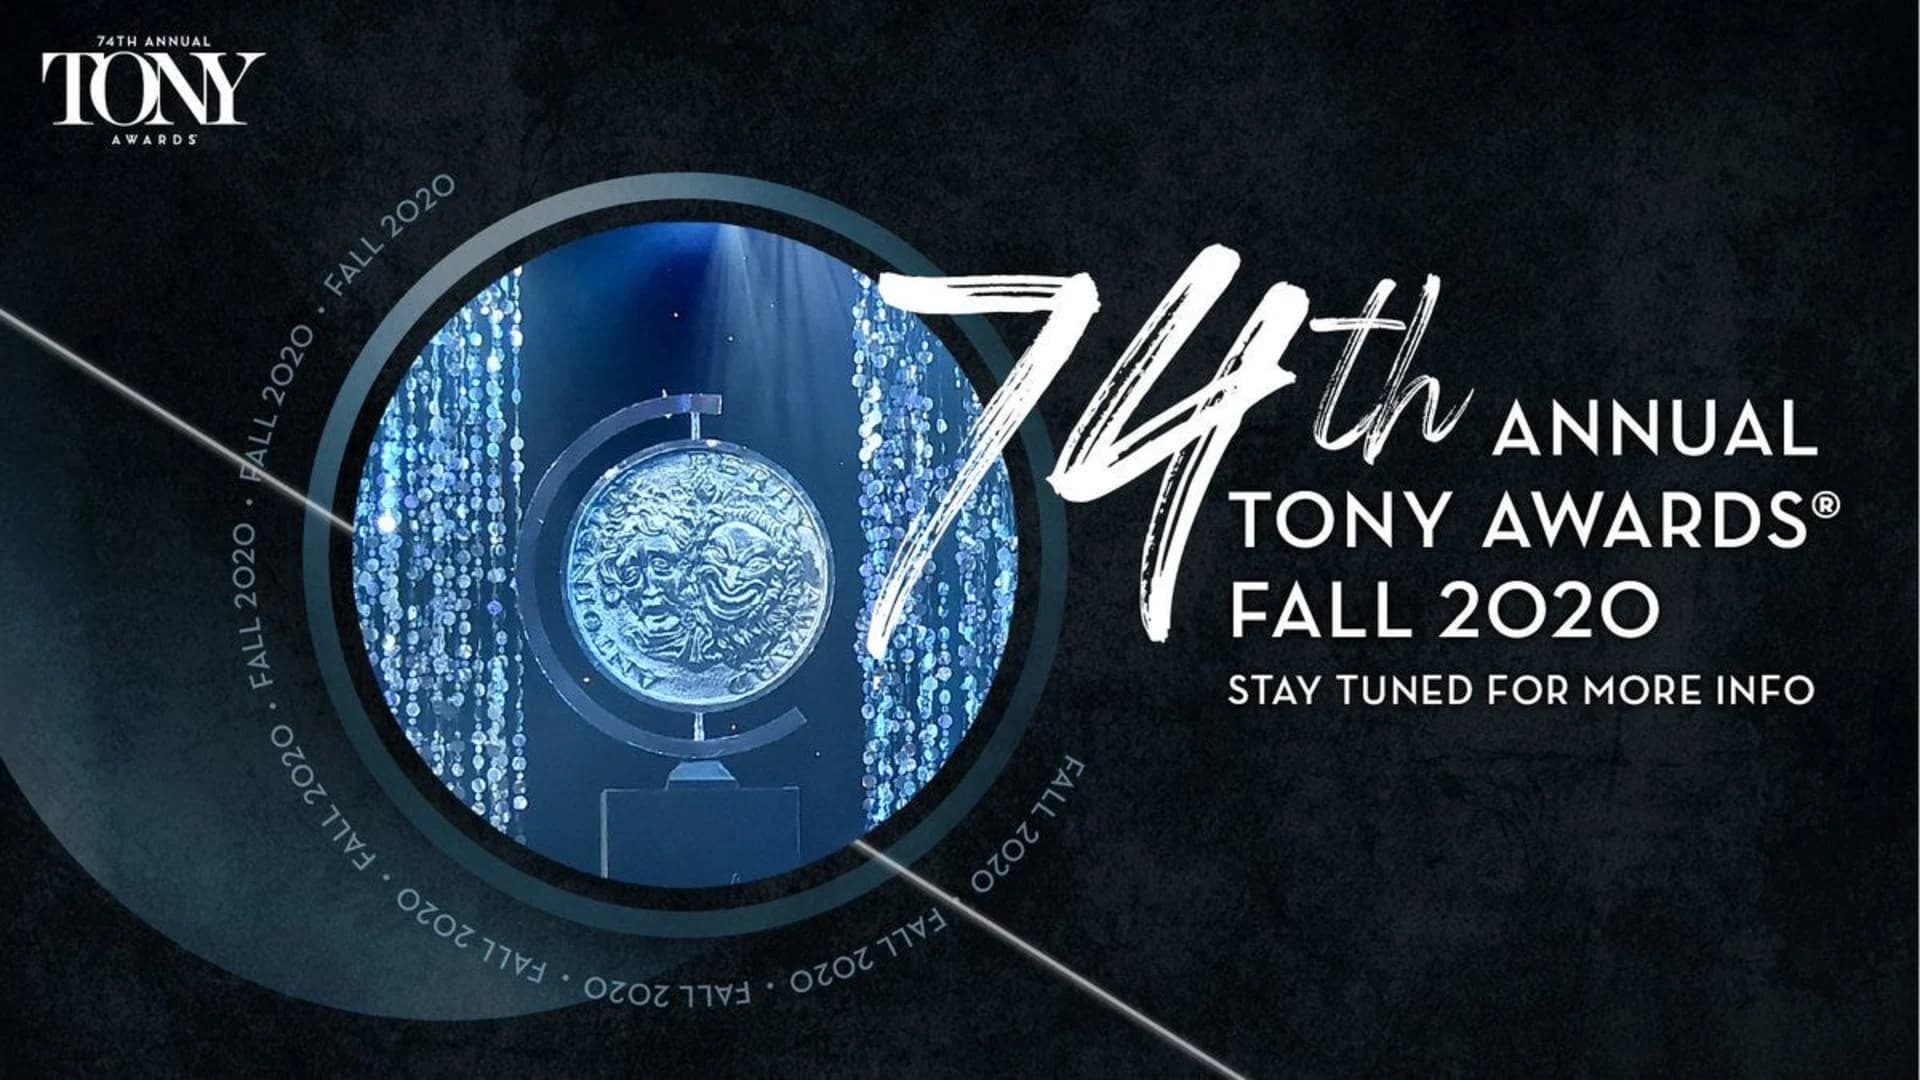 'The show must go on': 74th Tony Awards to take place digitally this fall